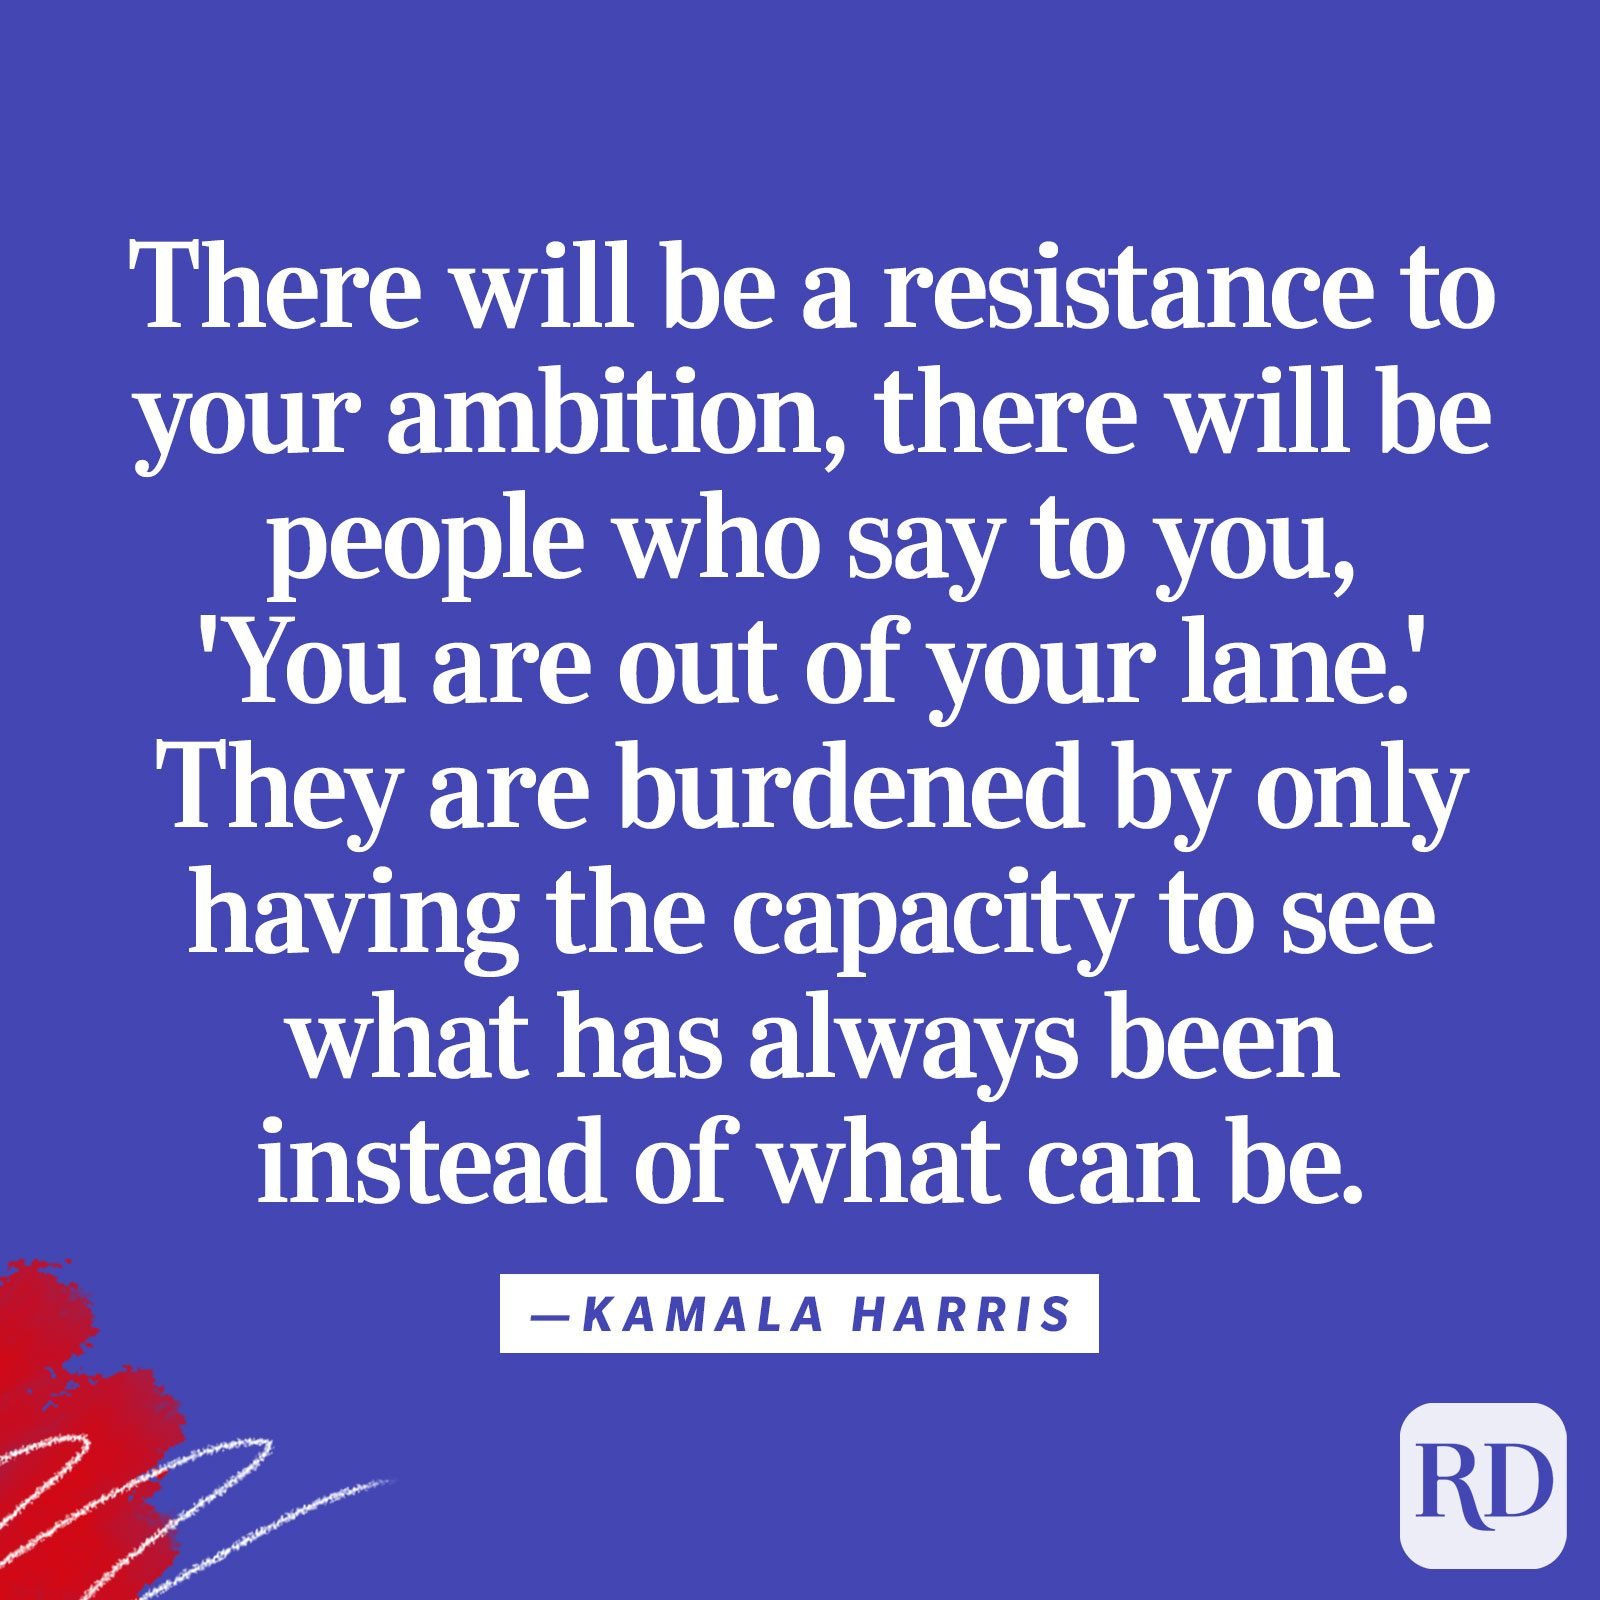 "There will be a resistance to your ambition, there will be people who say to you, 'You are out of your lane.' They are burdened by only having the capacity to see what has always been instead of what can be."